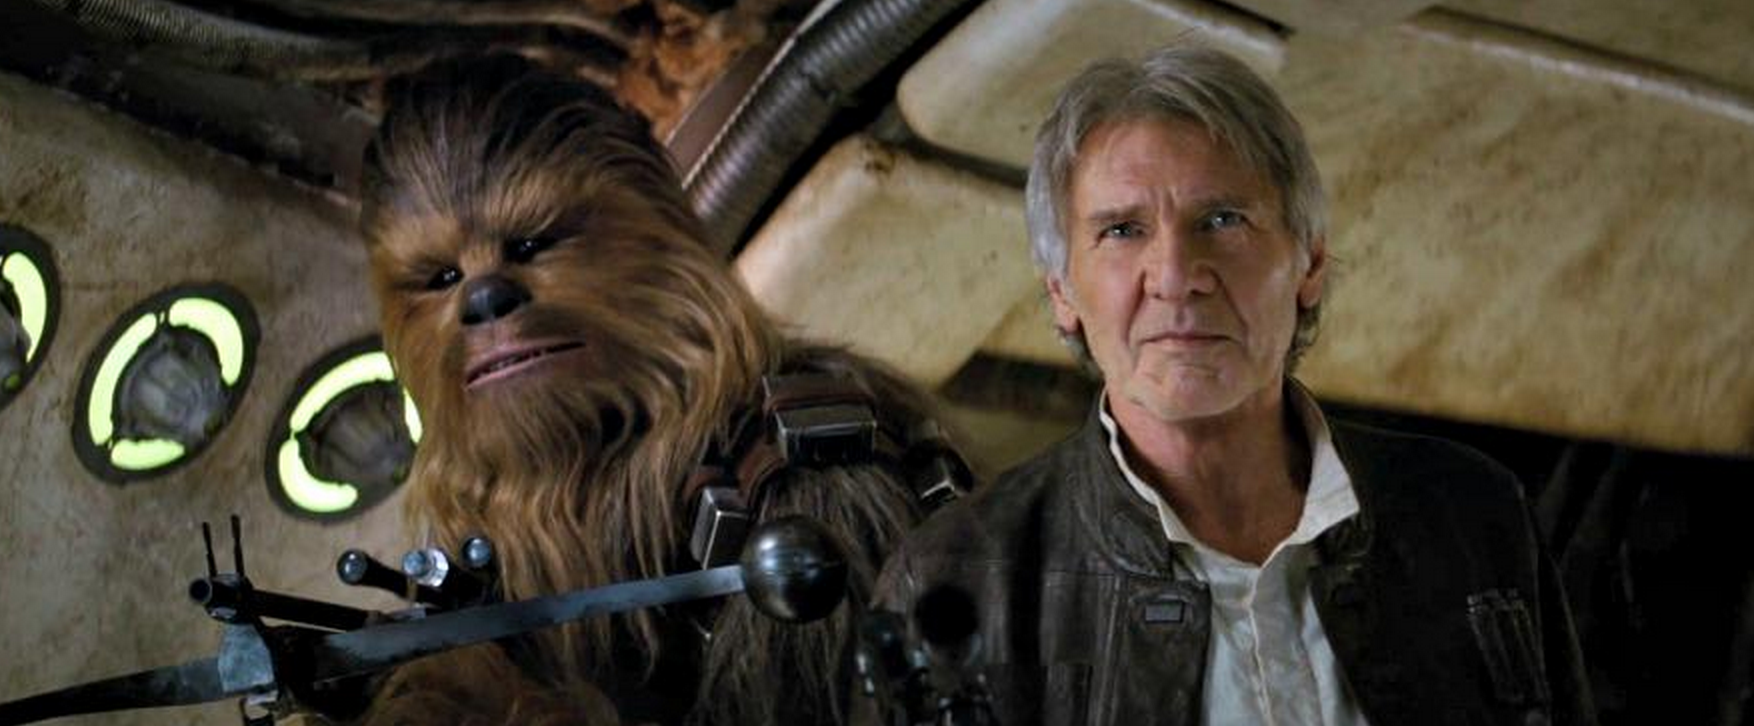 Chewy and Han Solo return in Star Wars: The Force Awakens. Courtesy of Disney/Lucasfilm.